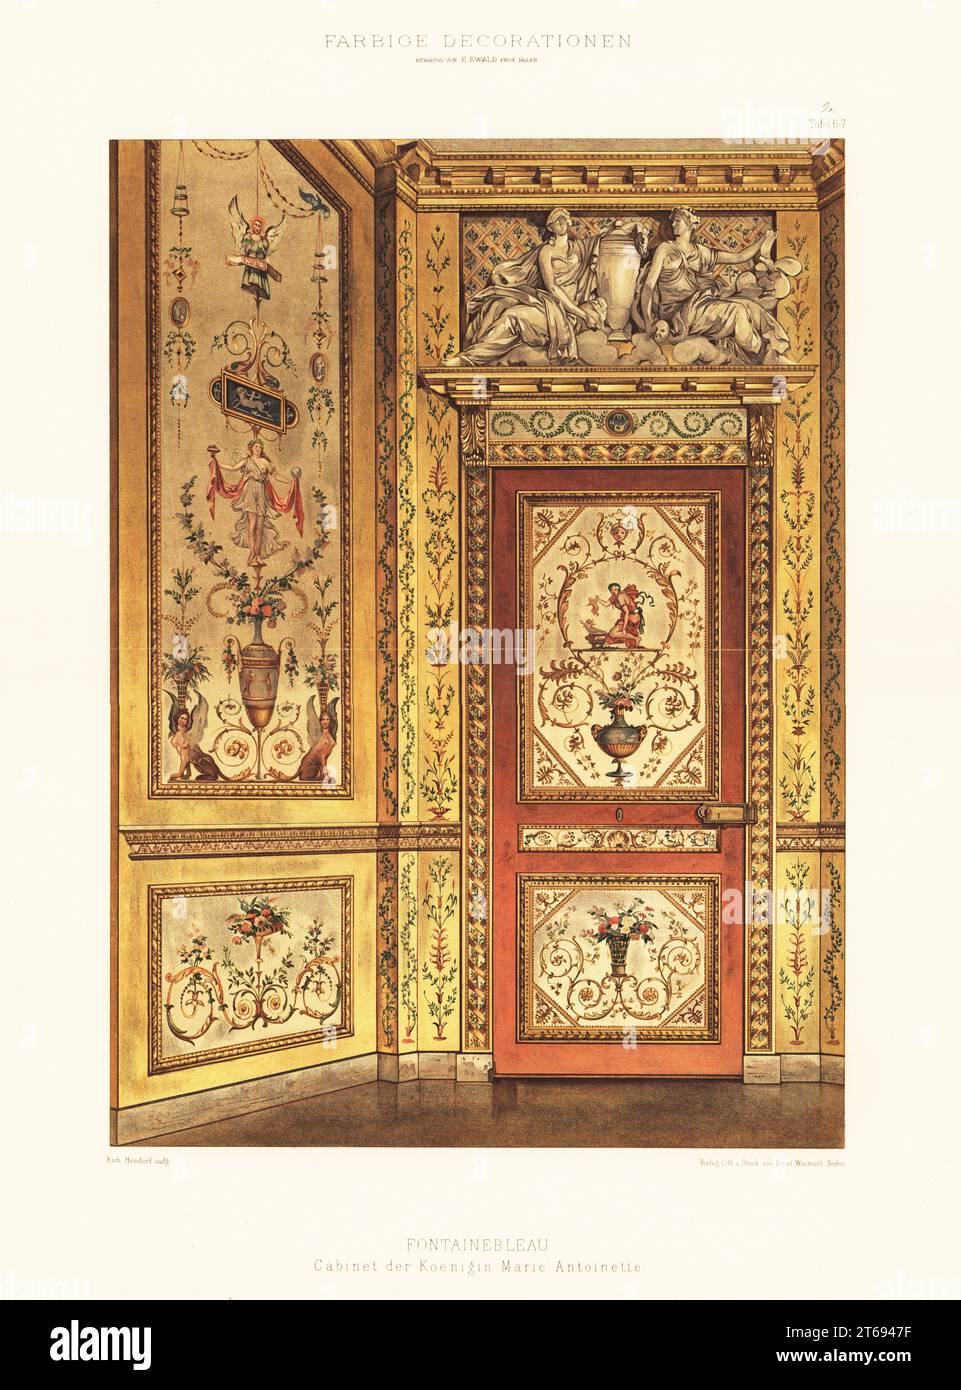 Wall panels and door in Queen Marie Antoinette's room, Palace of Fontainebleau, 18th century. Cabinet der Koeingin Marie Antoinette, Chateau de Fontainebleau. Chromolithograph by Richard Hendorf from Ernst Ewalds Farbige decorationen, alter und never Zeit (Color decoration, ancient and new eras), Ernst Wasmuth, Berlin, 1896. Stock Photo